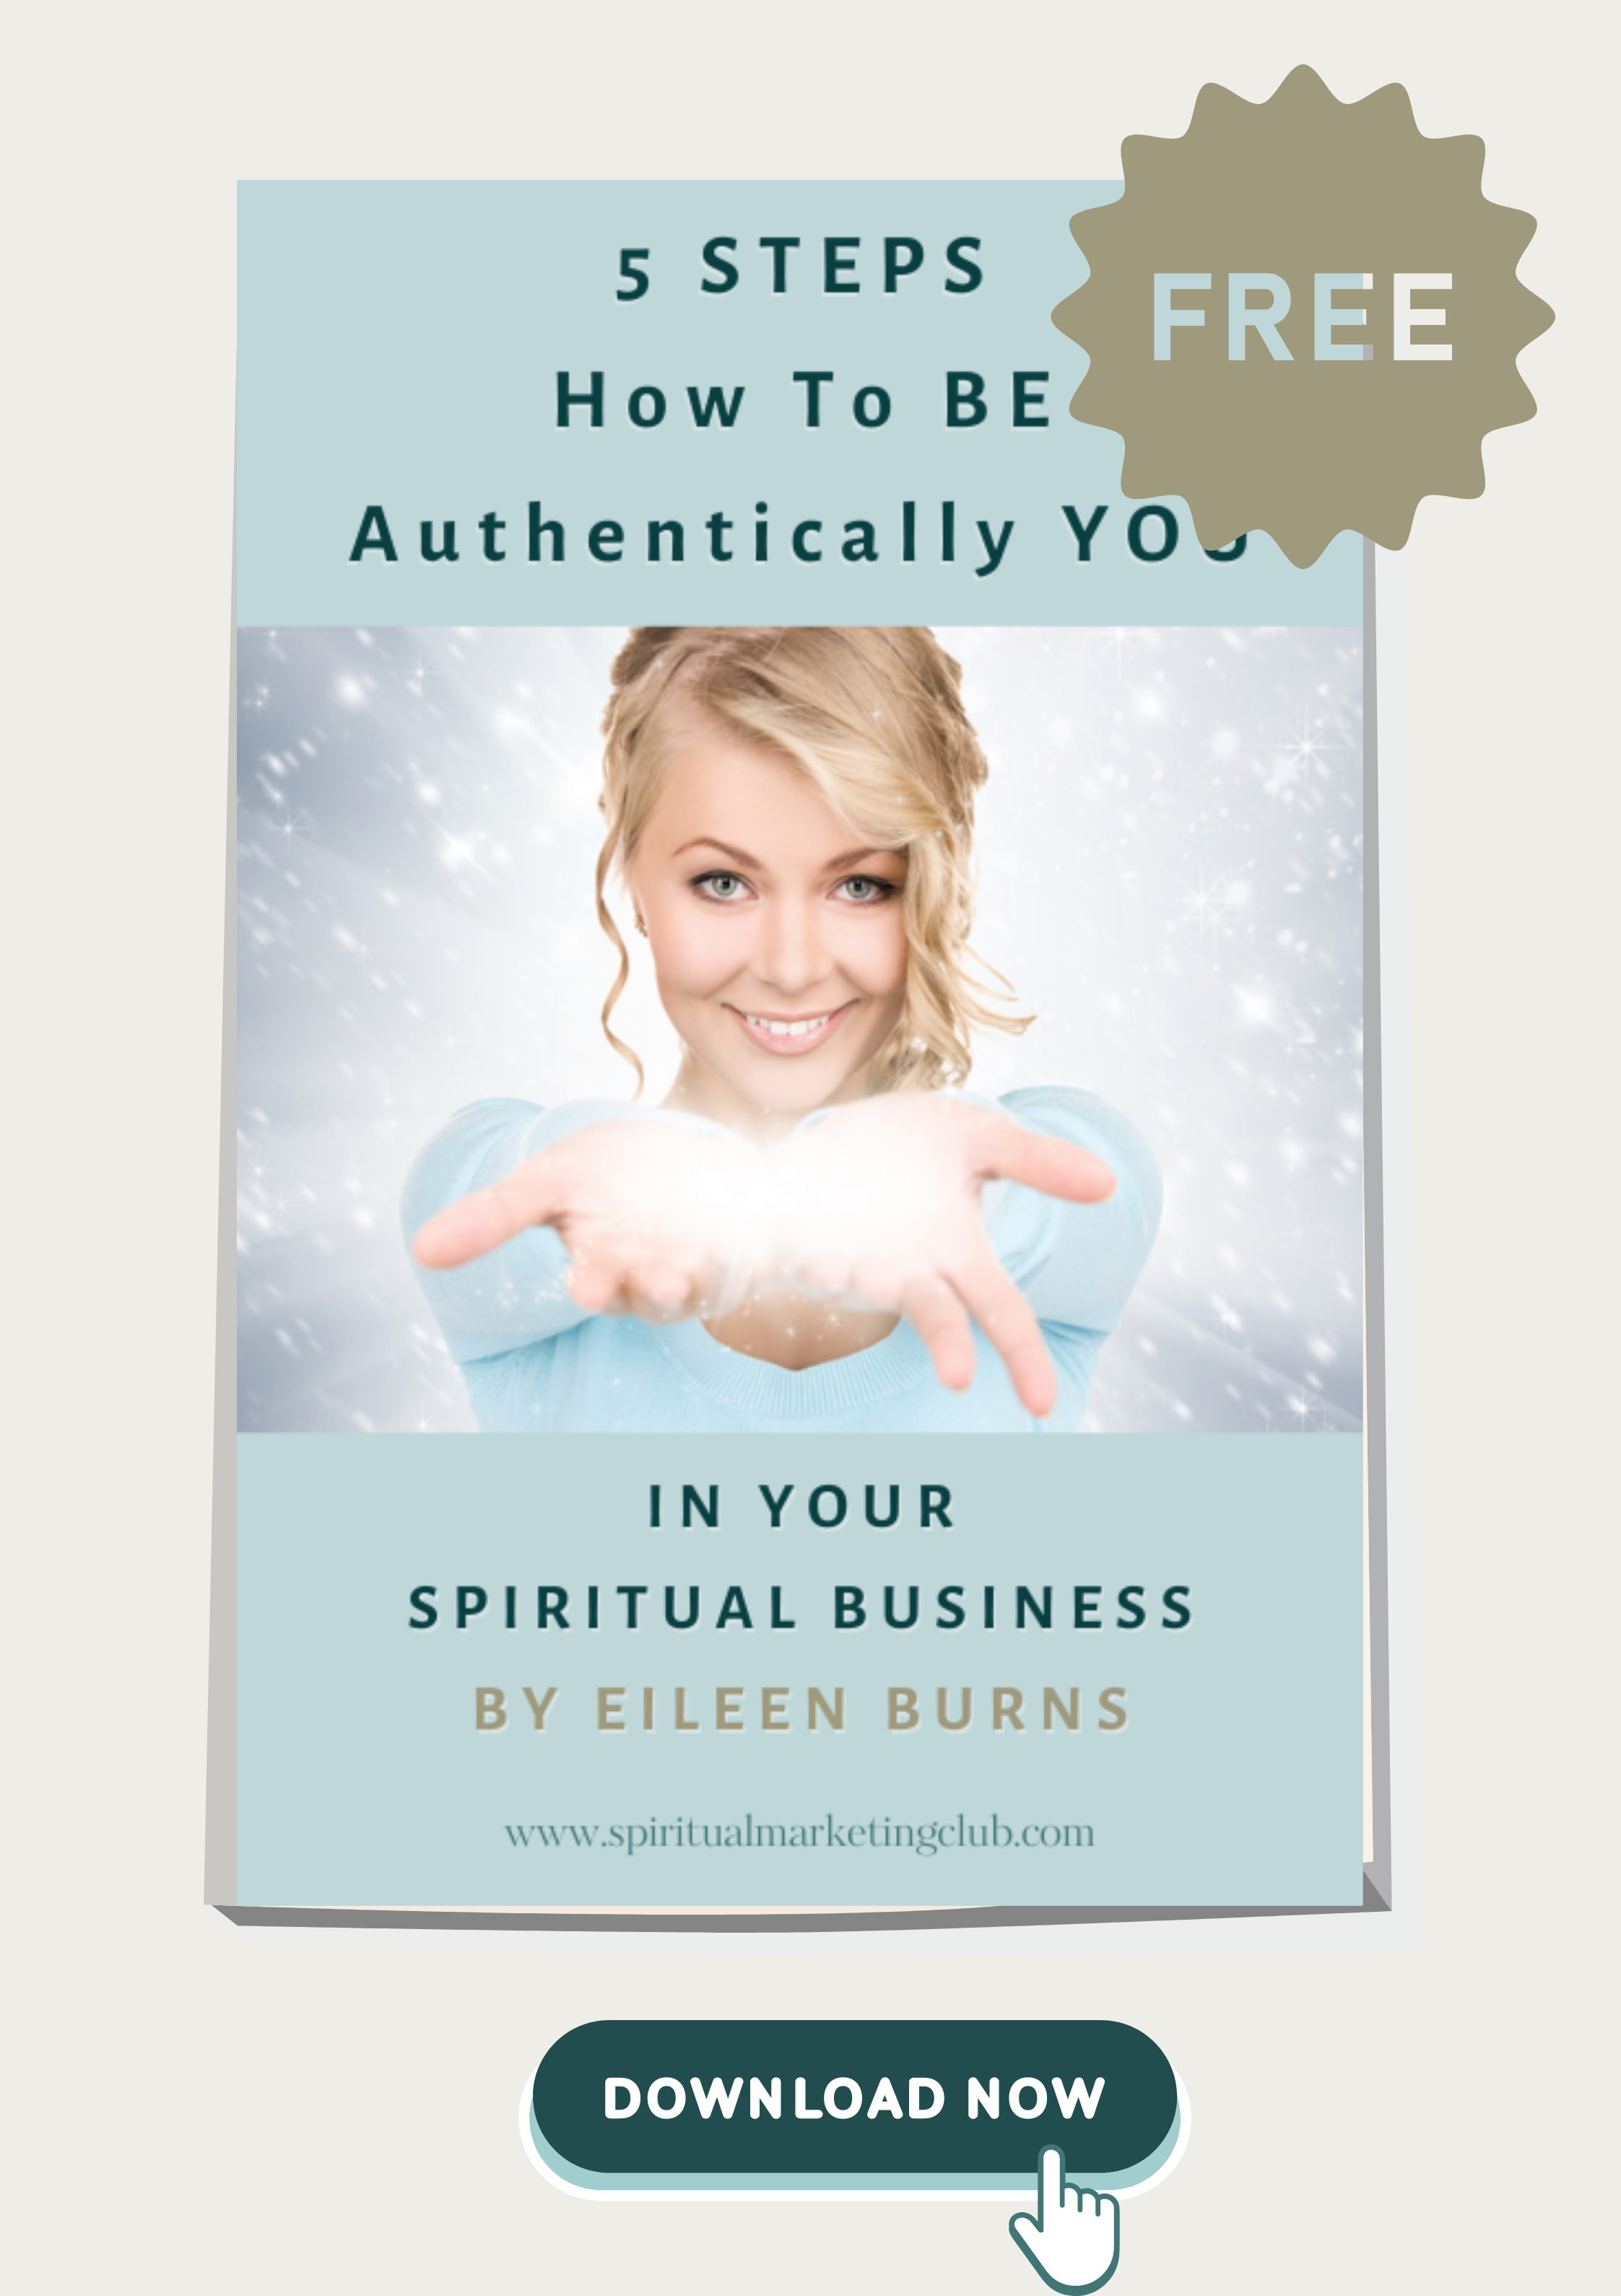 Spiritual Business Coaching Book On How To Be Authentic In Business